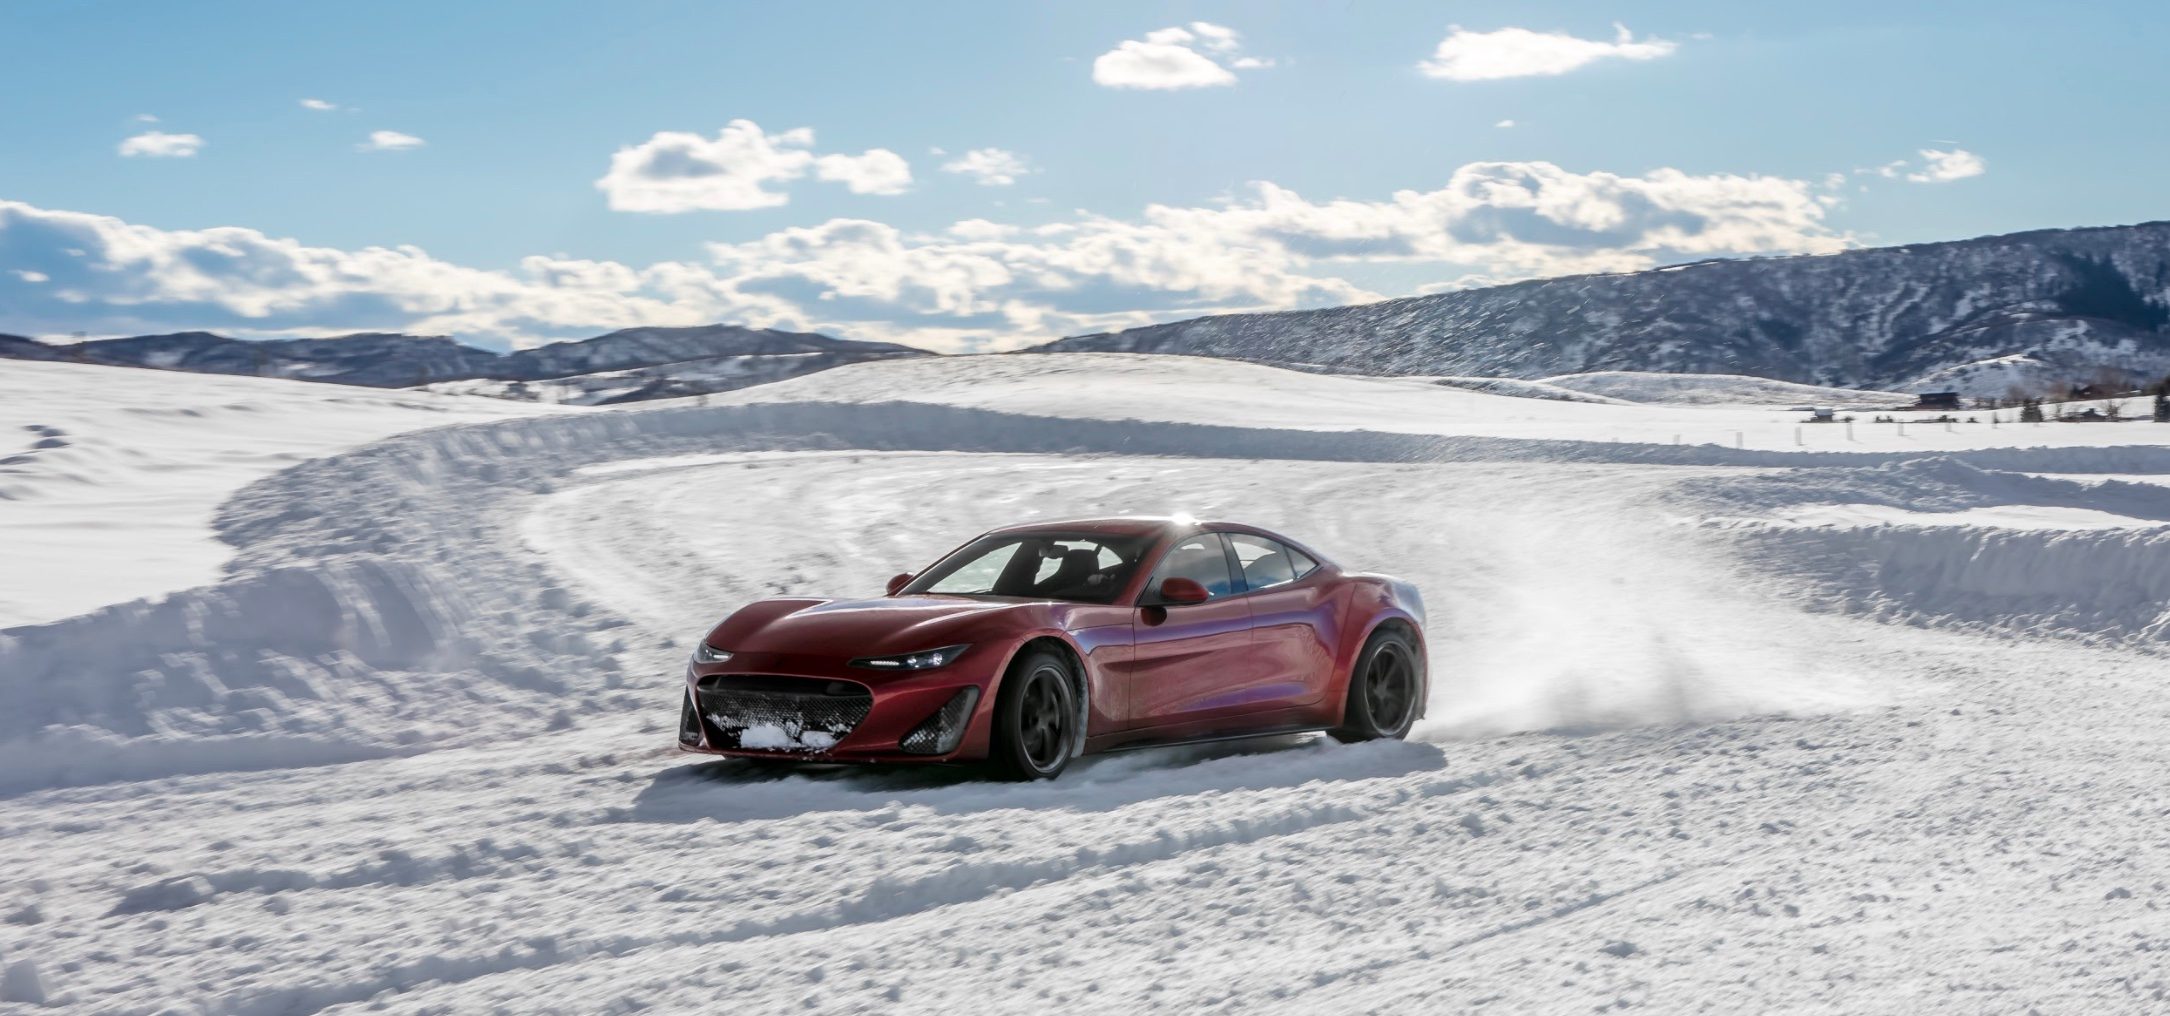 Watch stunning footage of Drako's $1.2 million electric supercar driving in the snow